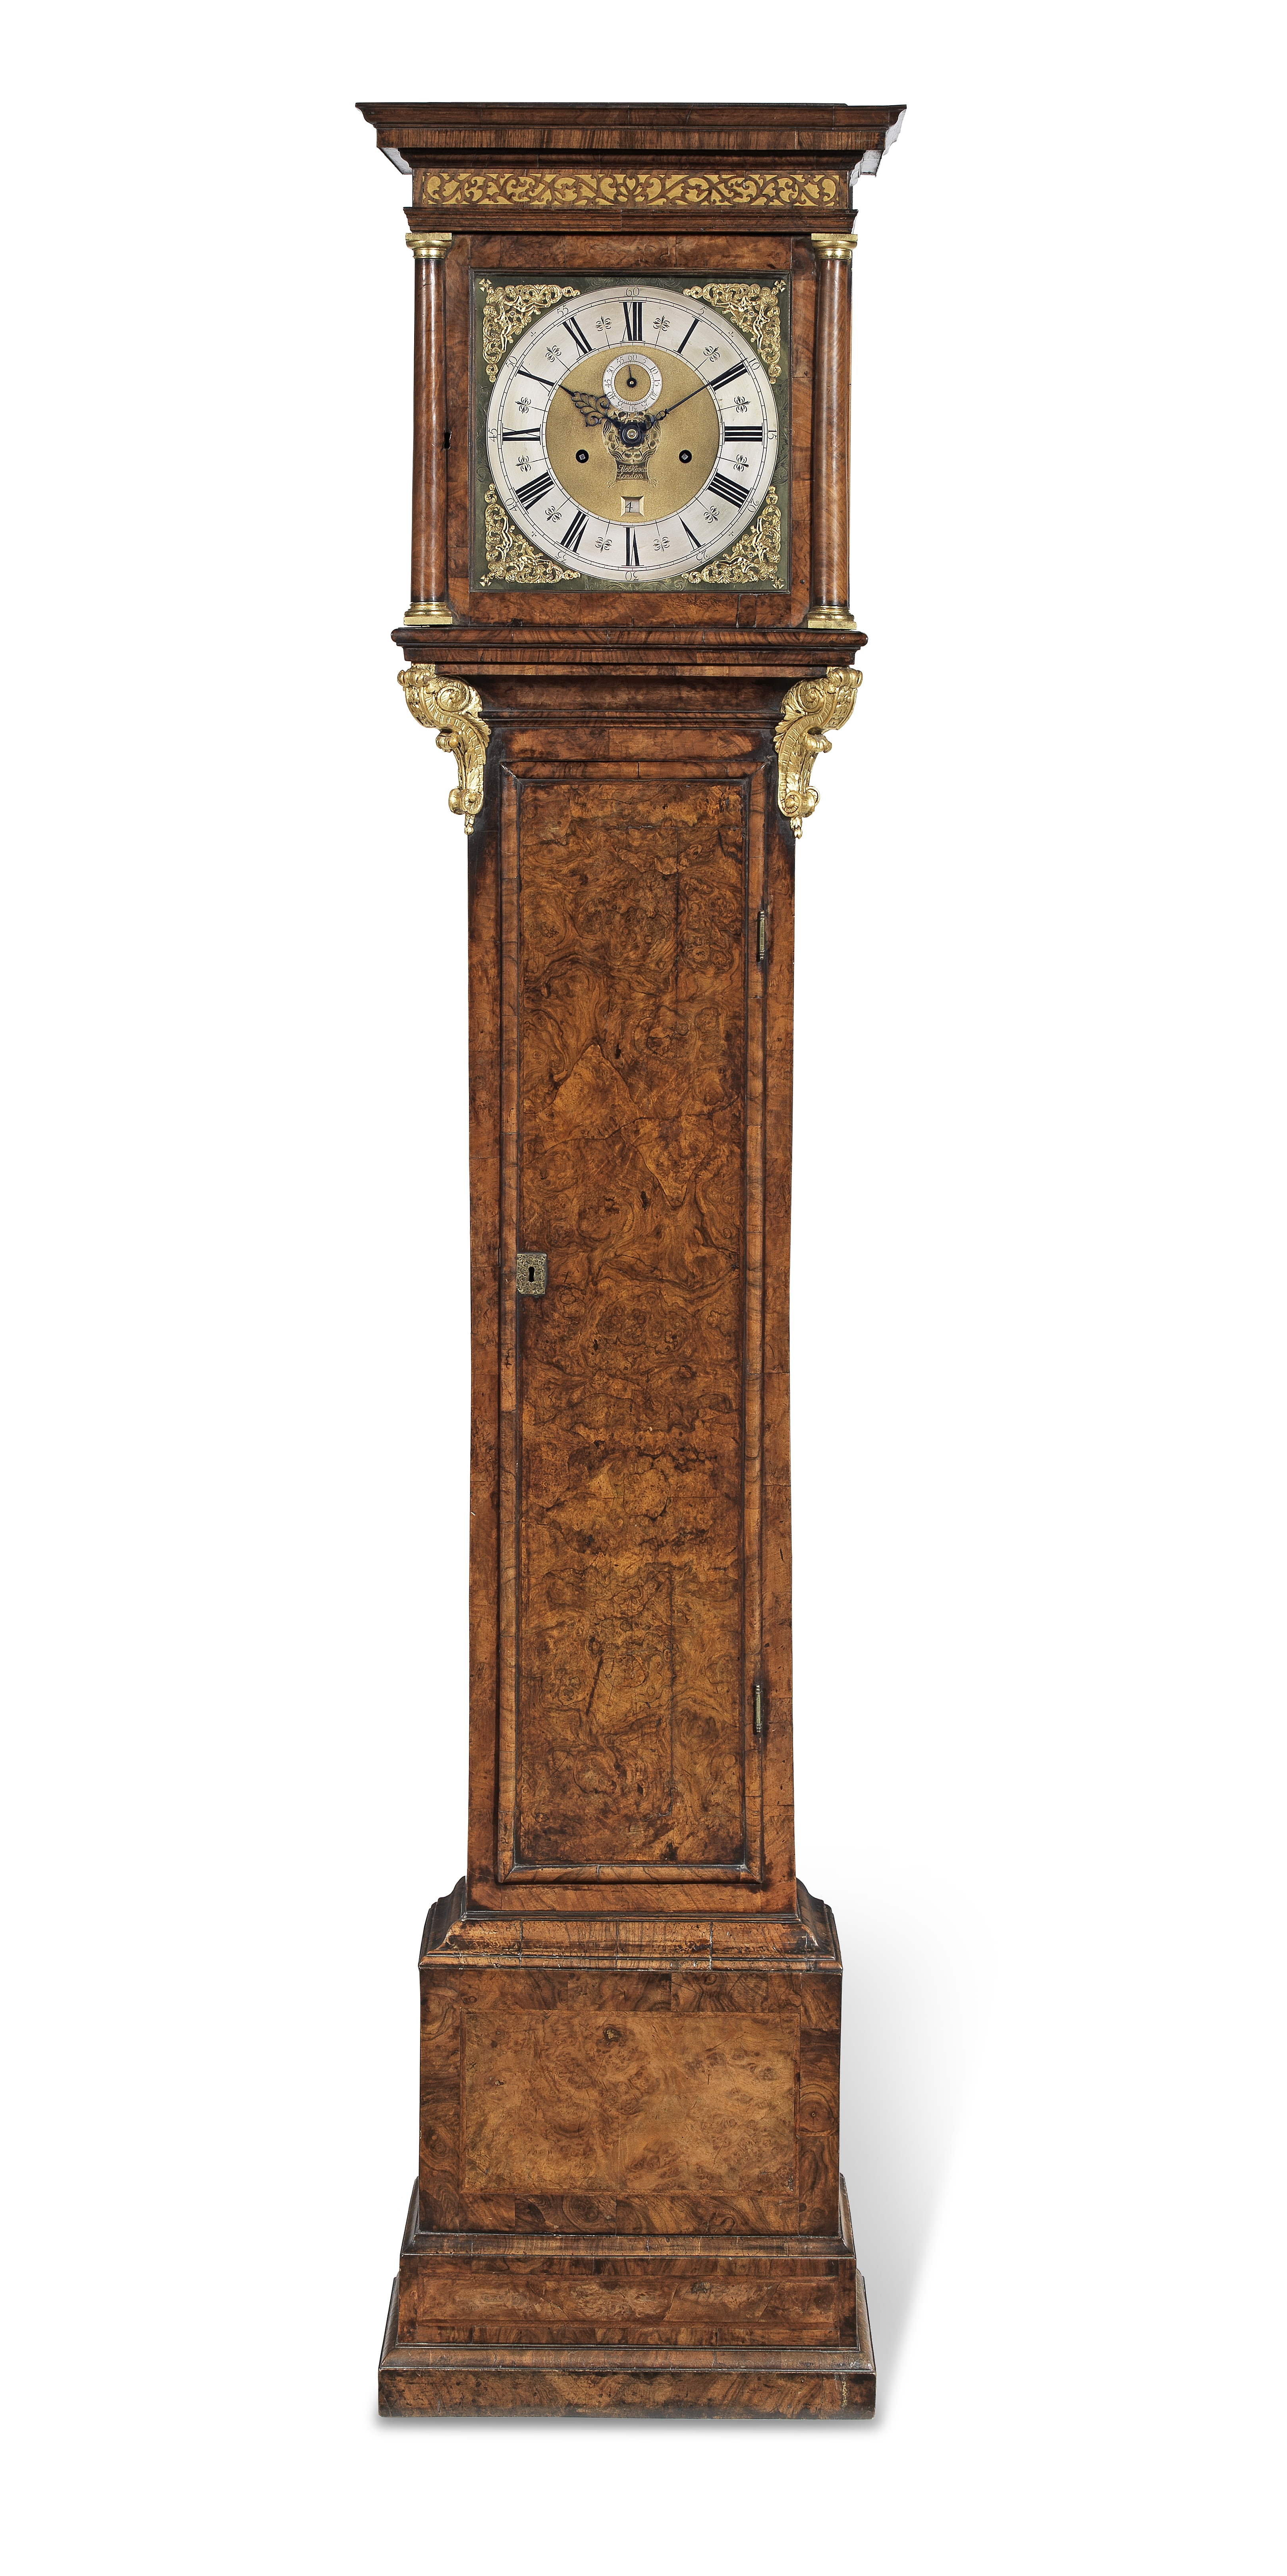 A FINE EARLY 18TH CENTURY FEATHERBANDED BURR WALNUT LONGCASE CLOCK OF ONE MONTH DURATION Alexande...